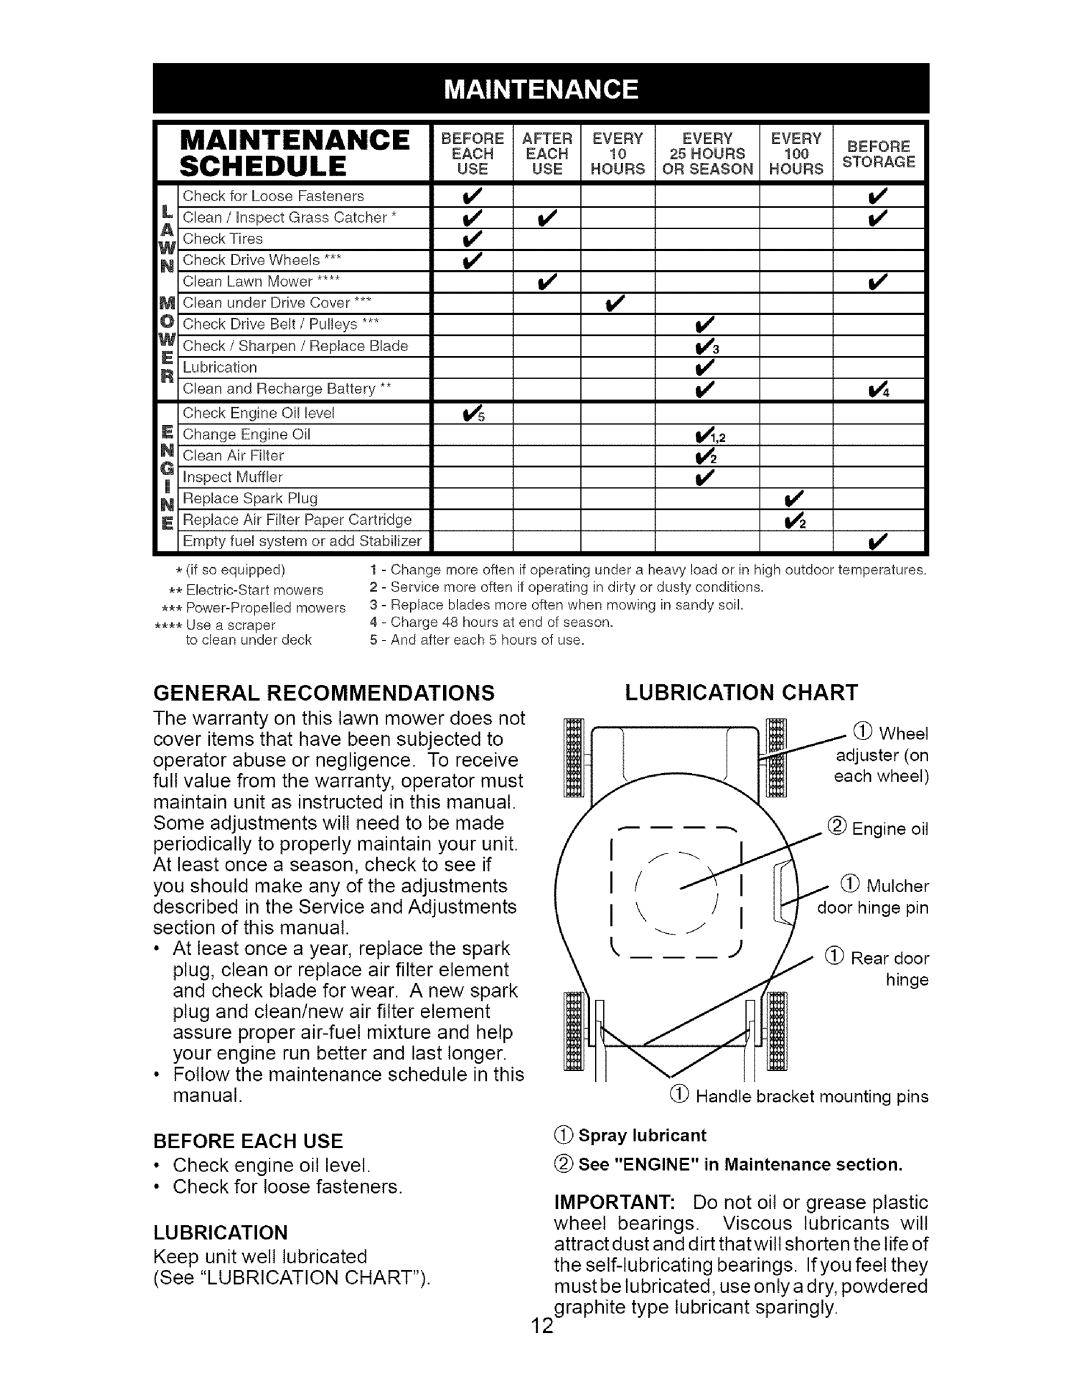 Craftsman 917.371721 owner manual Schedule, Lubrication Chart, General Recommendations, Lu Brication, Spray lubricant 